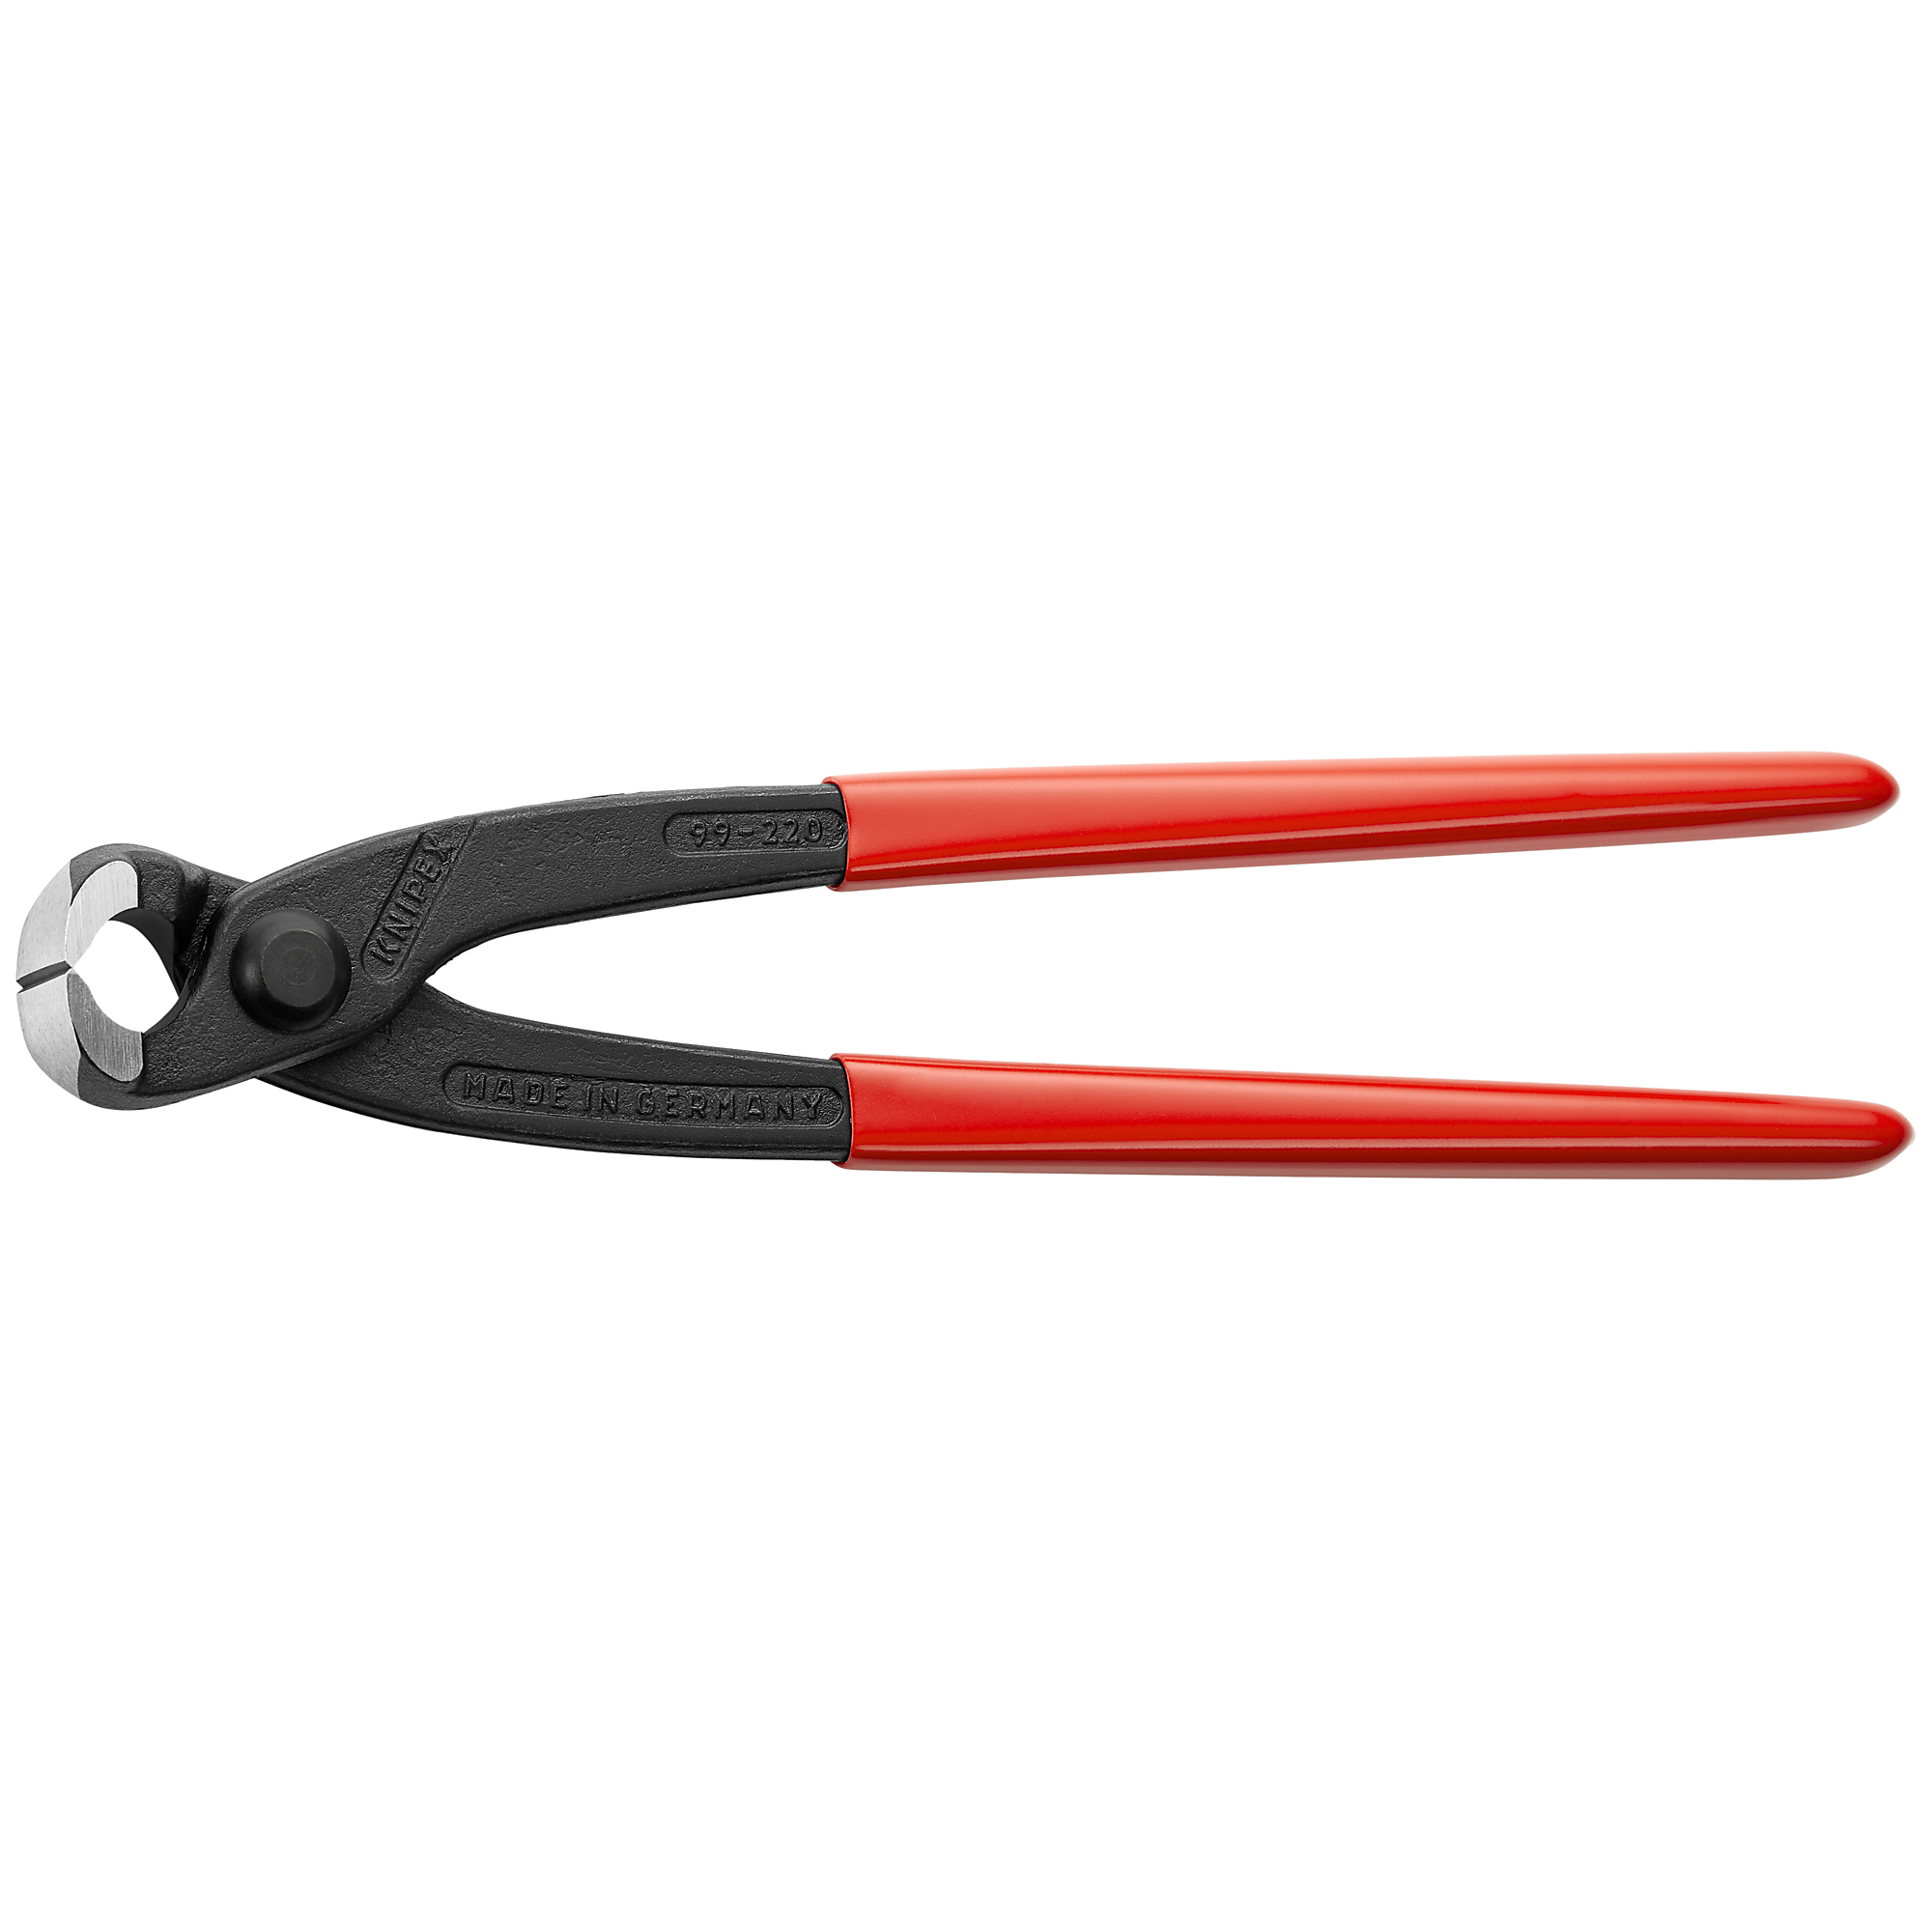 KNIPEX, Concreters' Nippers, Plastic coating, 8.75Inch, Pieces (qty.) 1 Material Steel, Jaw Capacity 0.094 in, Model 99 01 220 SBA